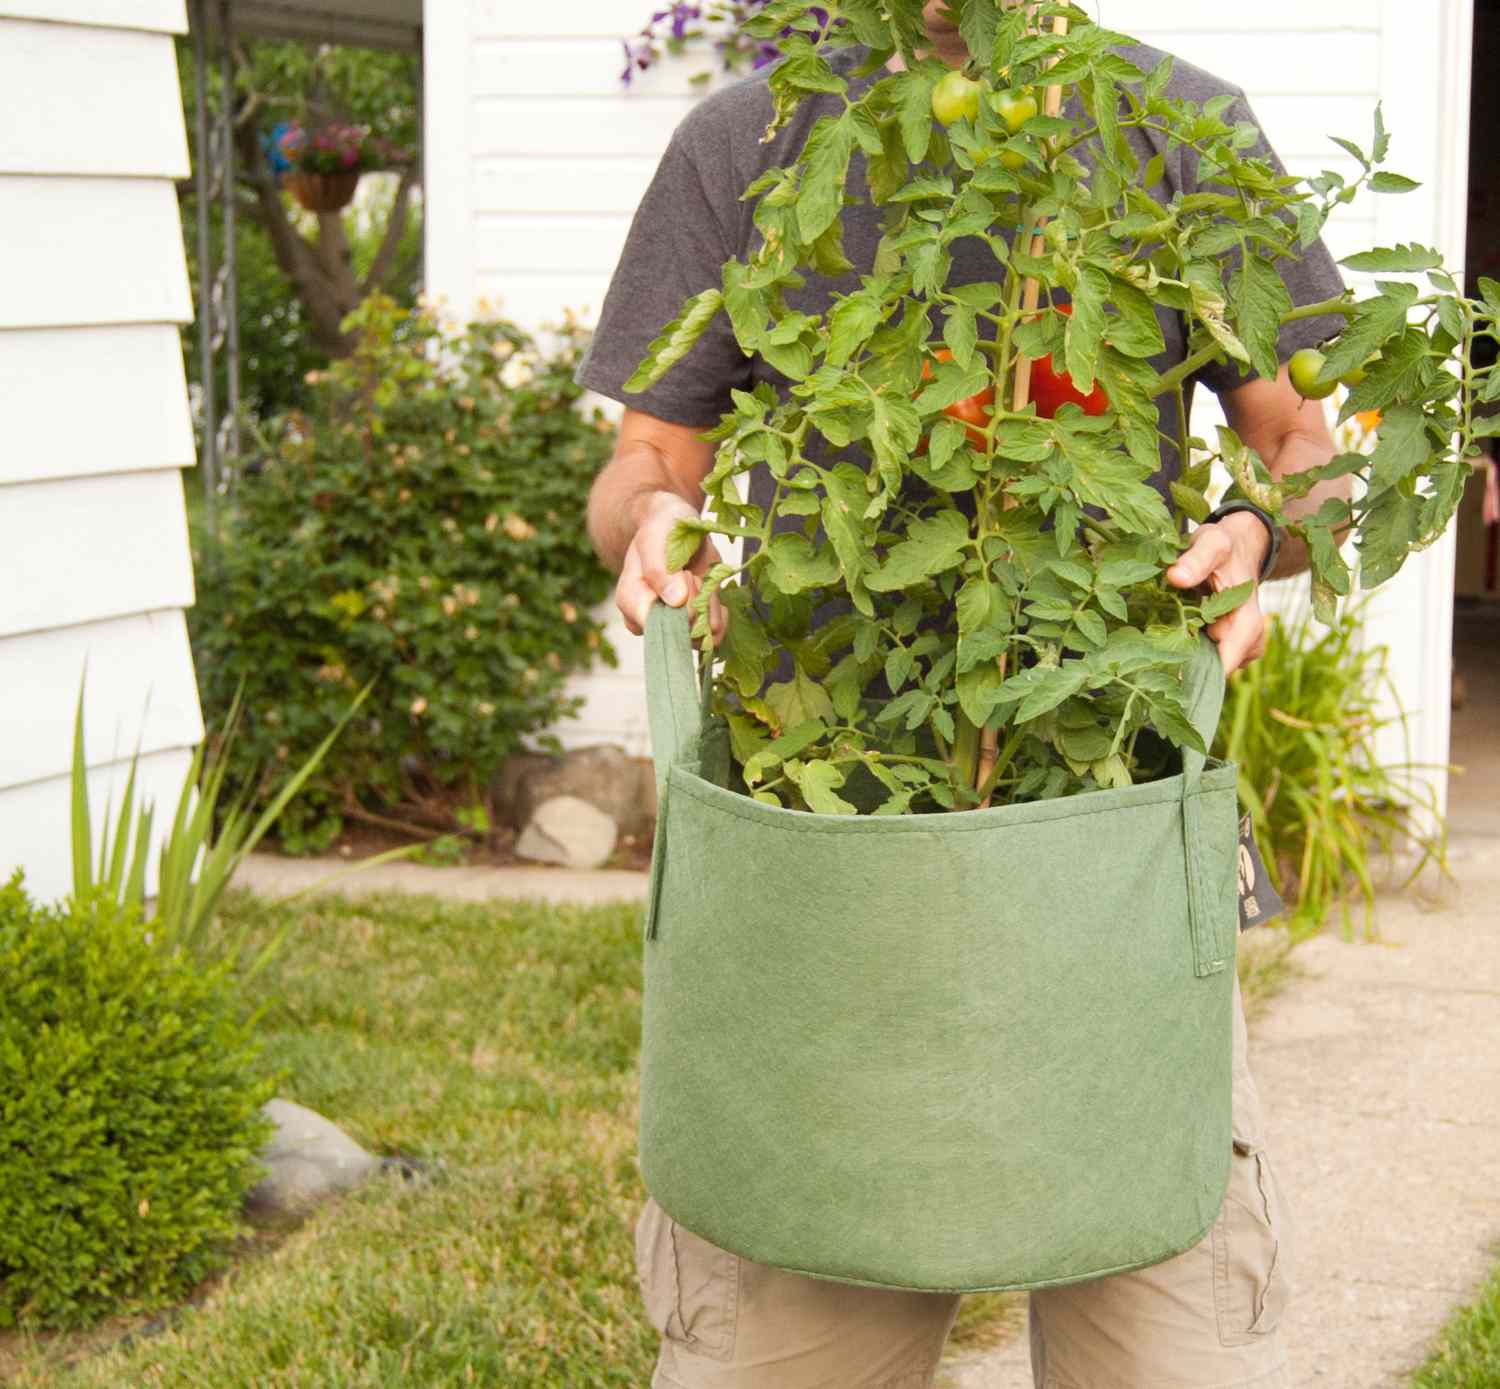 sextant Calm Economic How to Use Grow Bags for Amazing Vegetable Gardens | Midwest Living